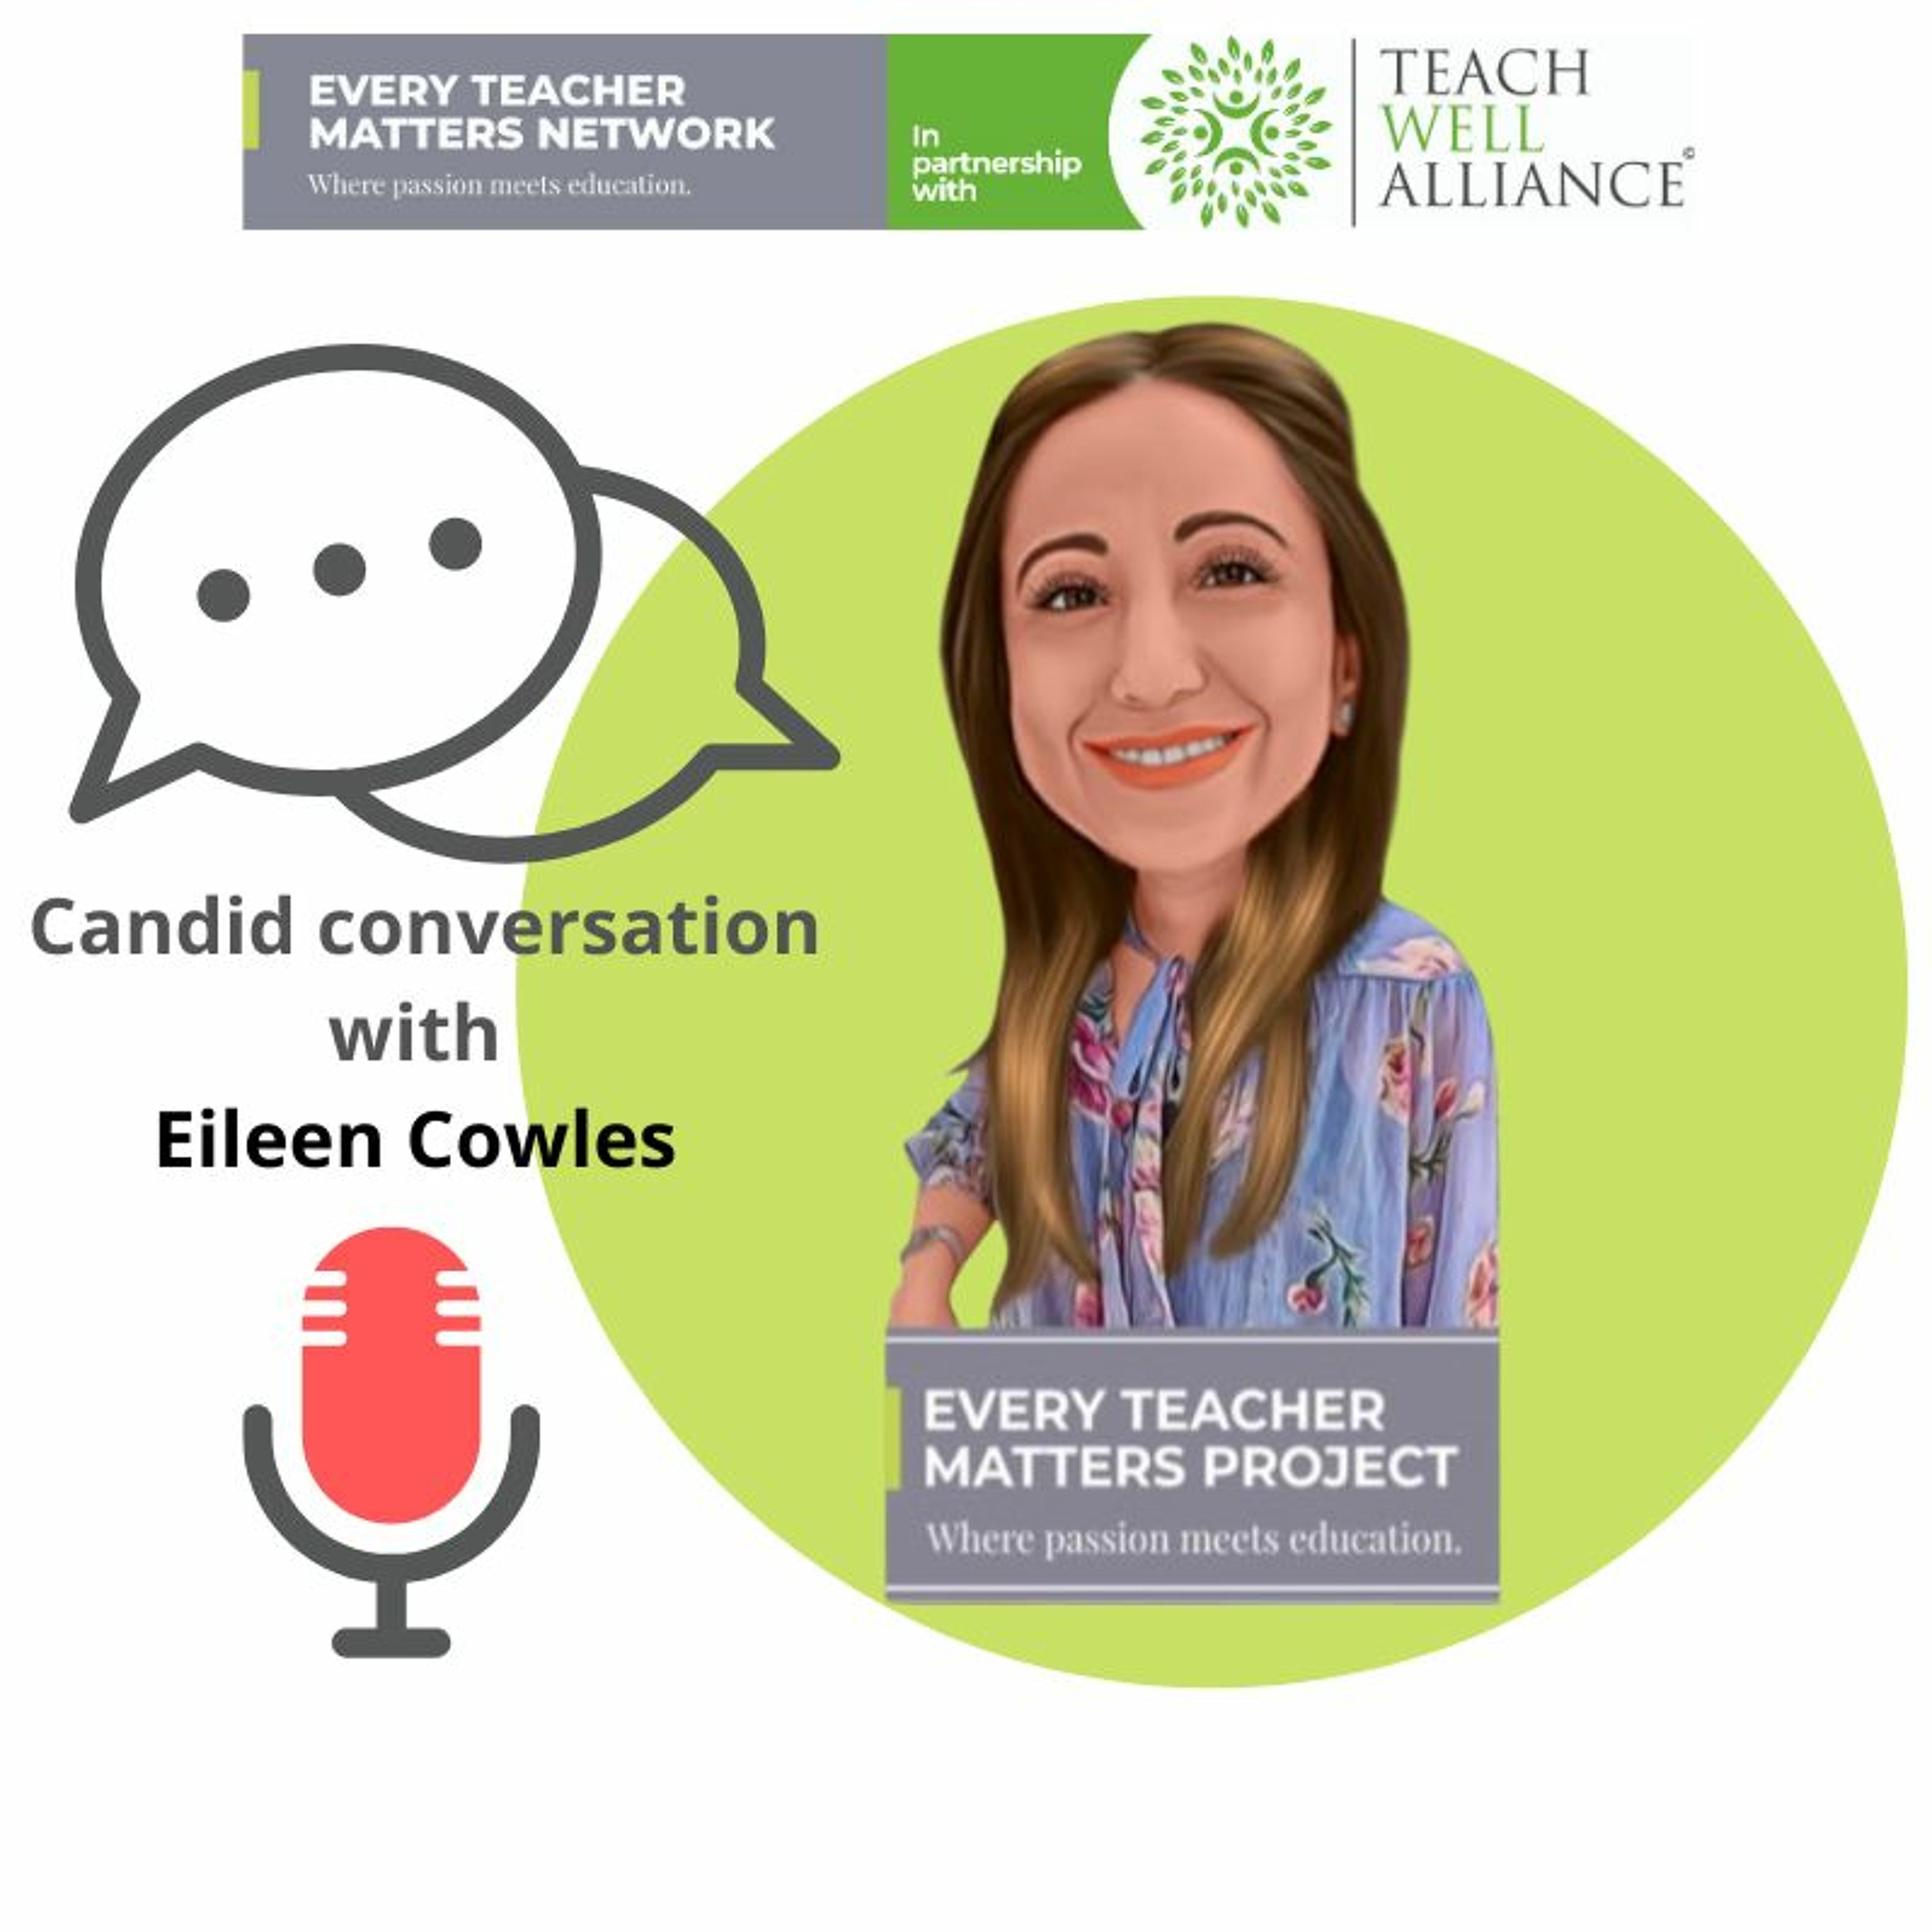 Conversation with Eileen Cowles